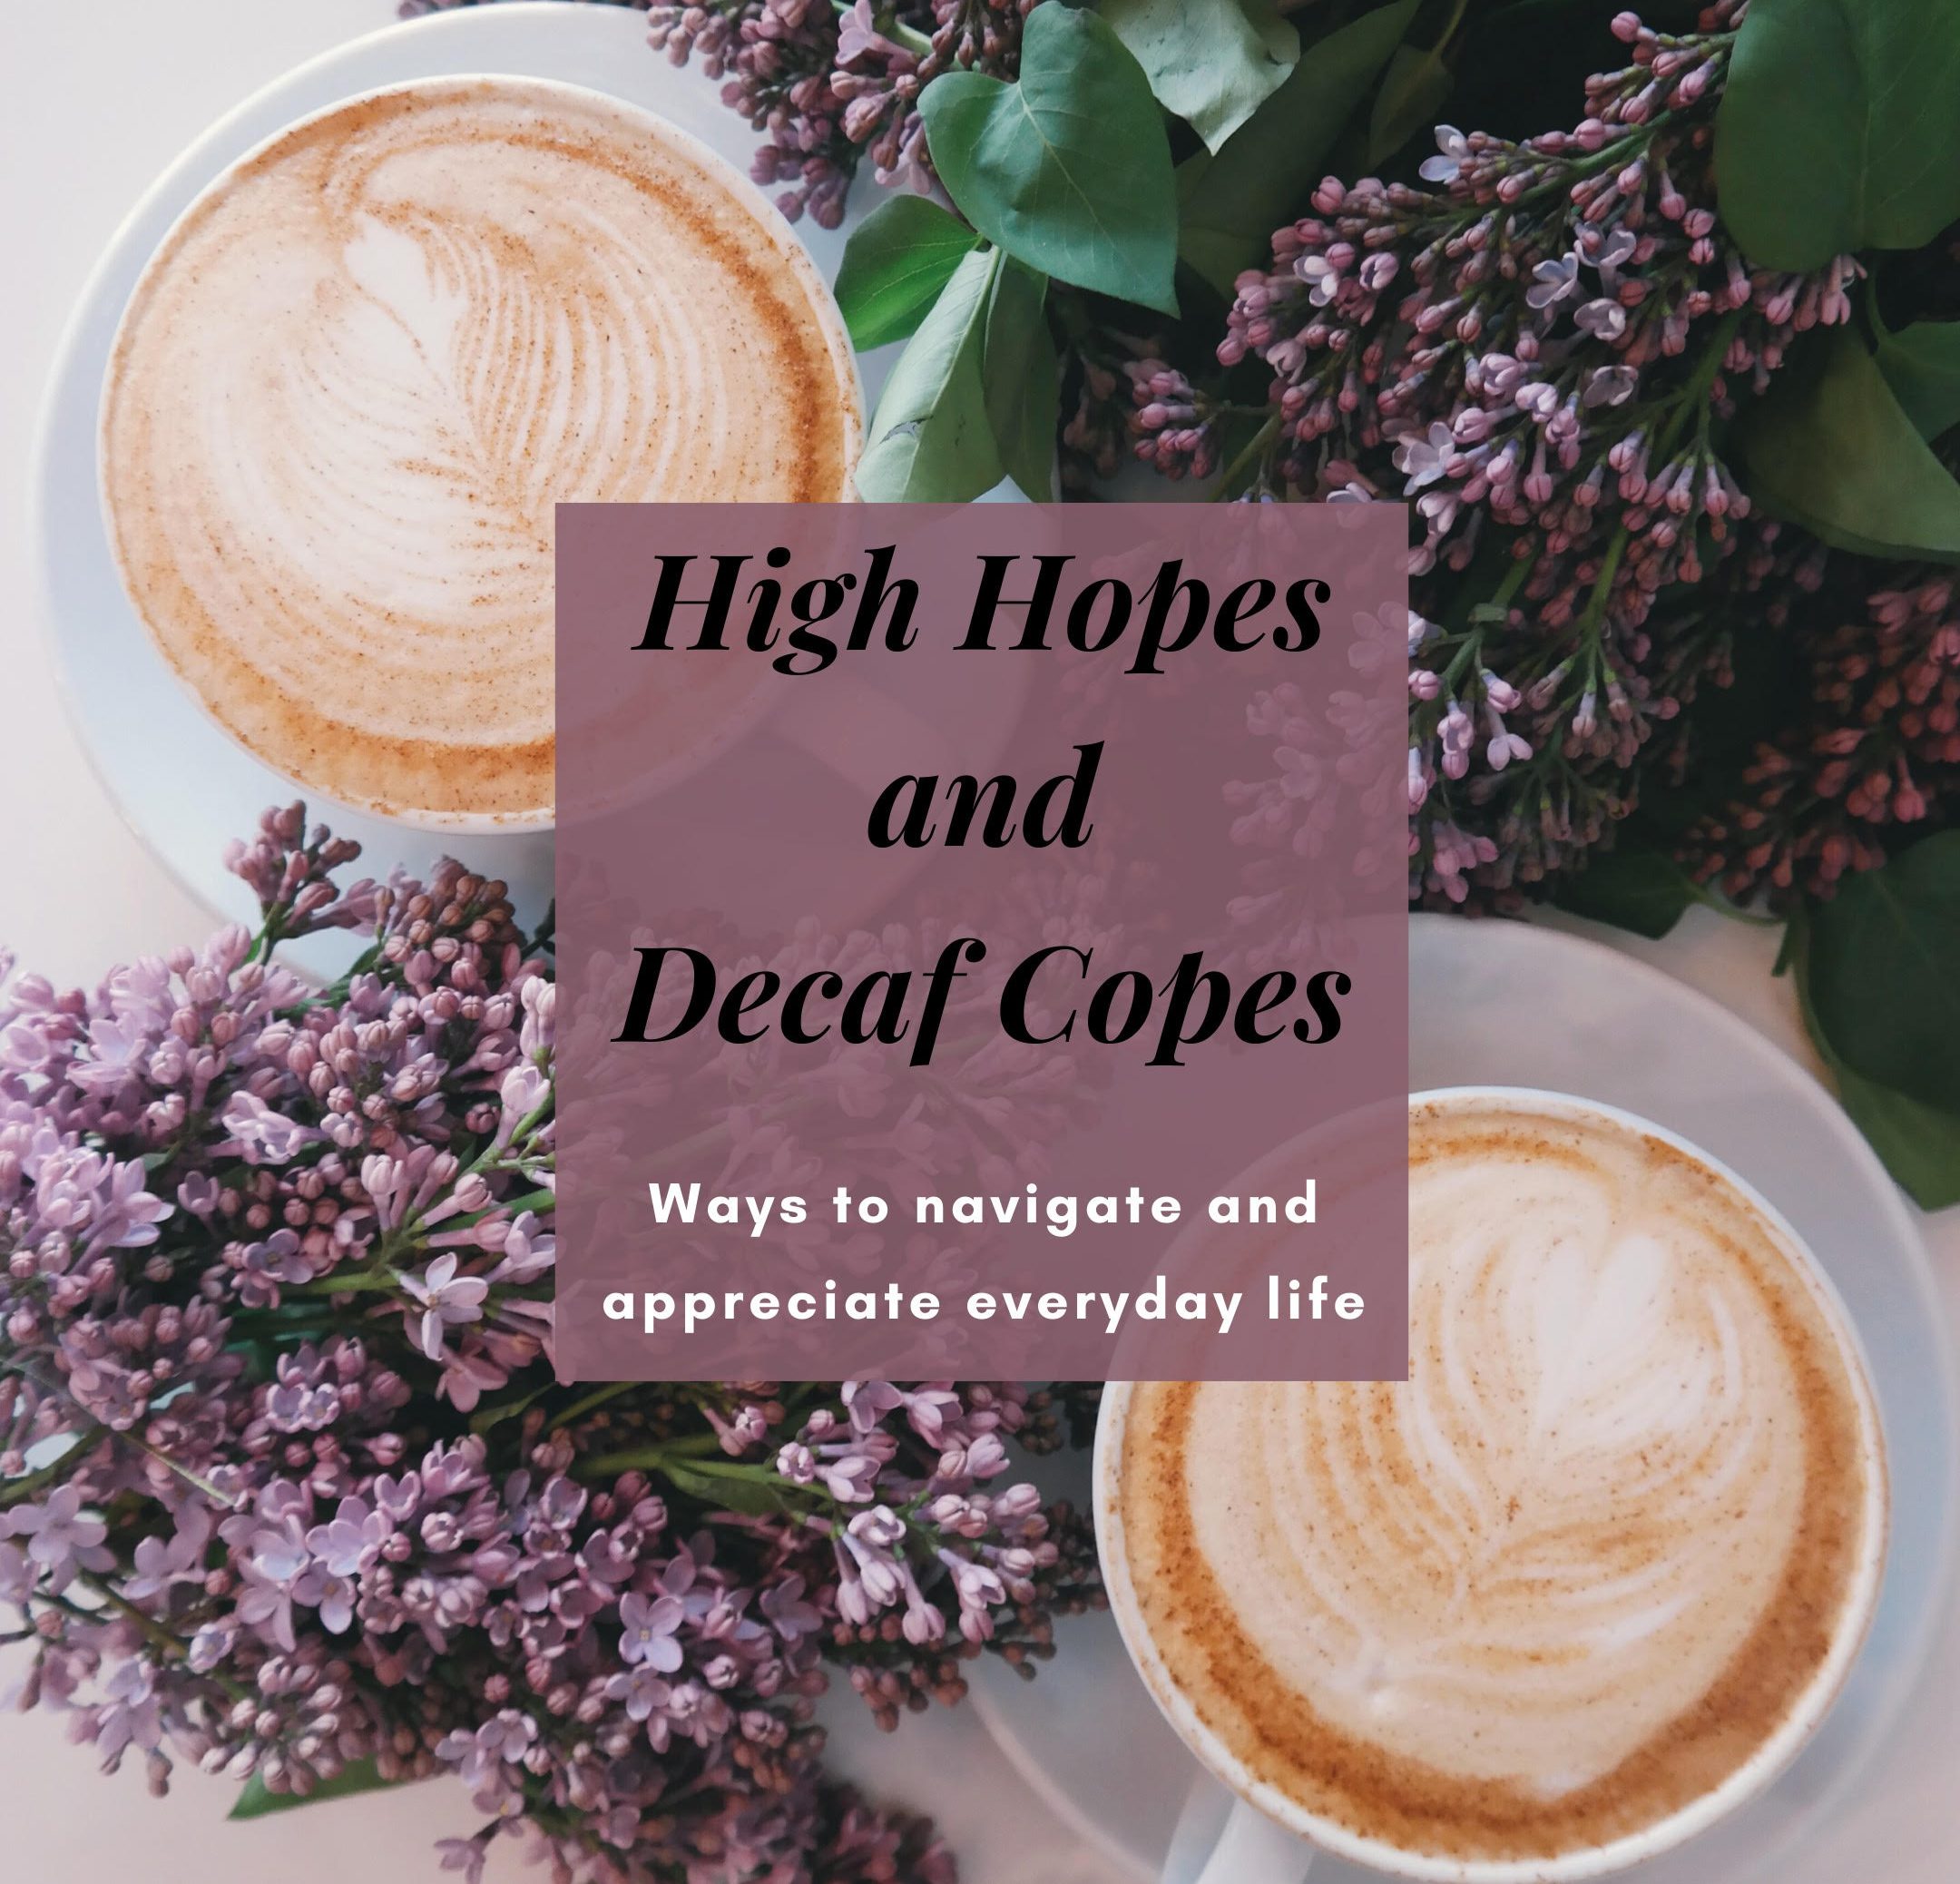 High Hopes and Decaf Copes